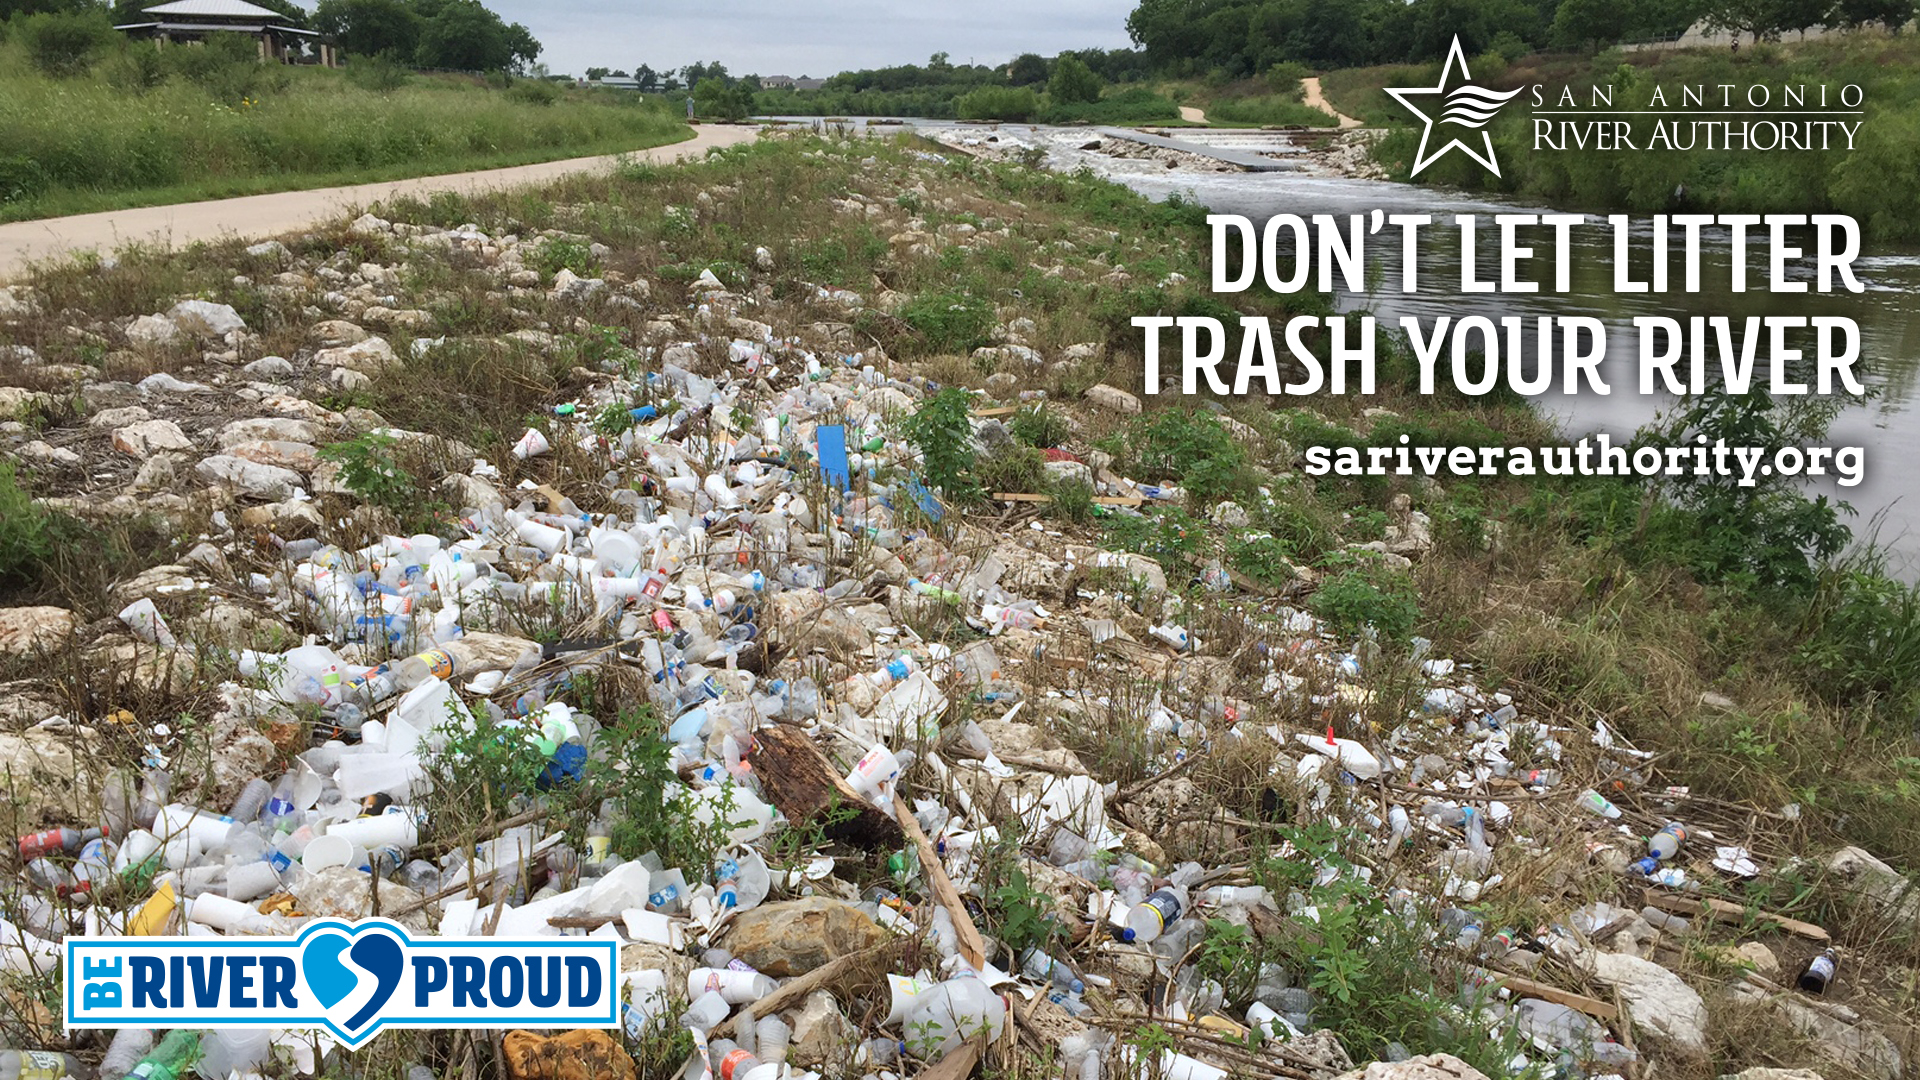 Download this virtual background and out litter in it's place! 